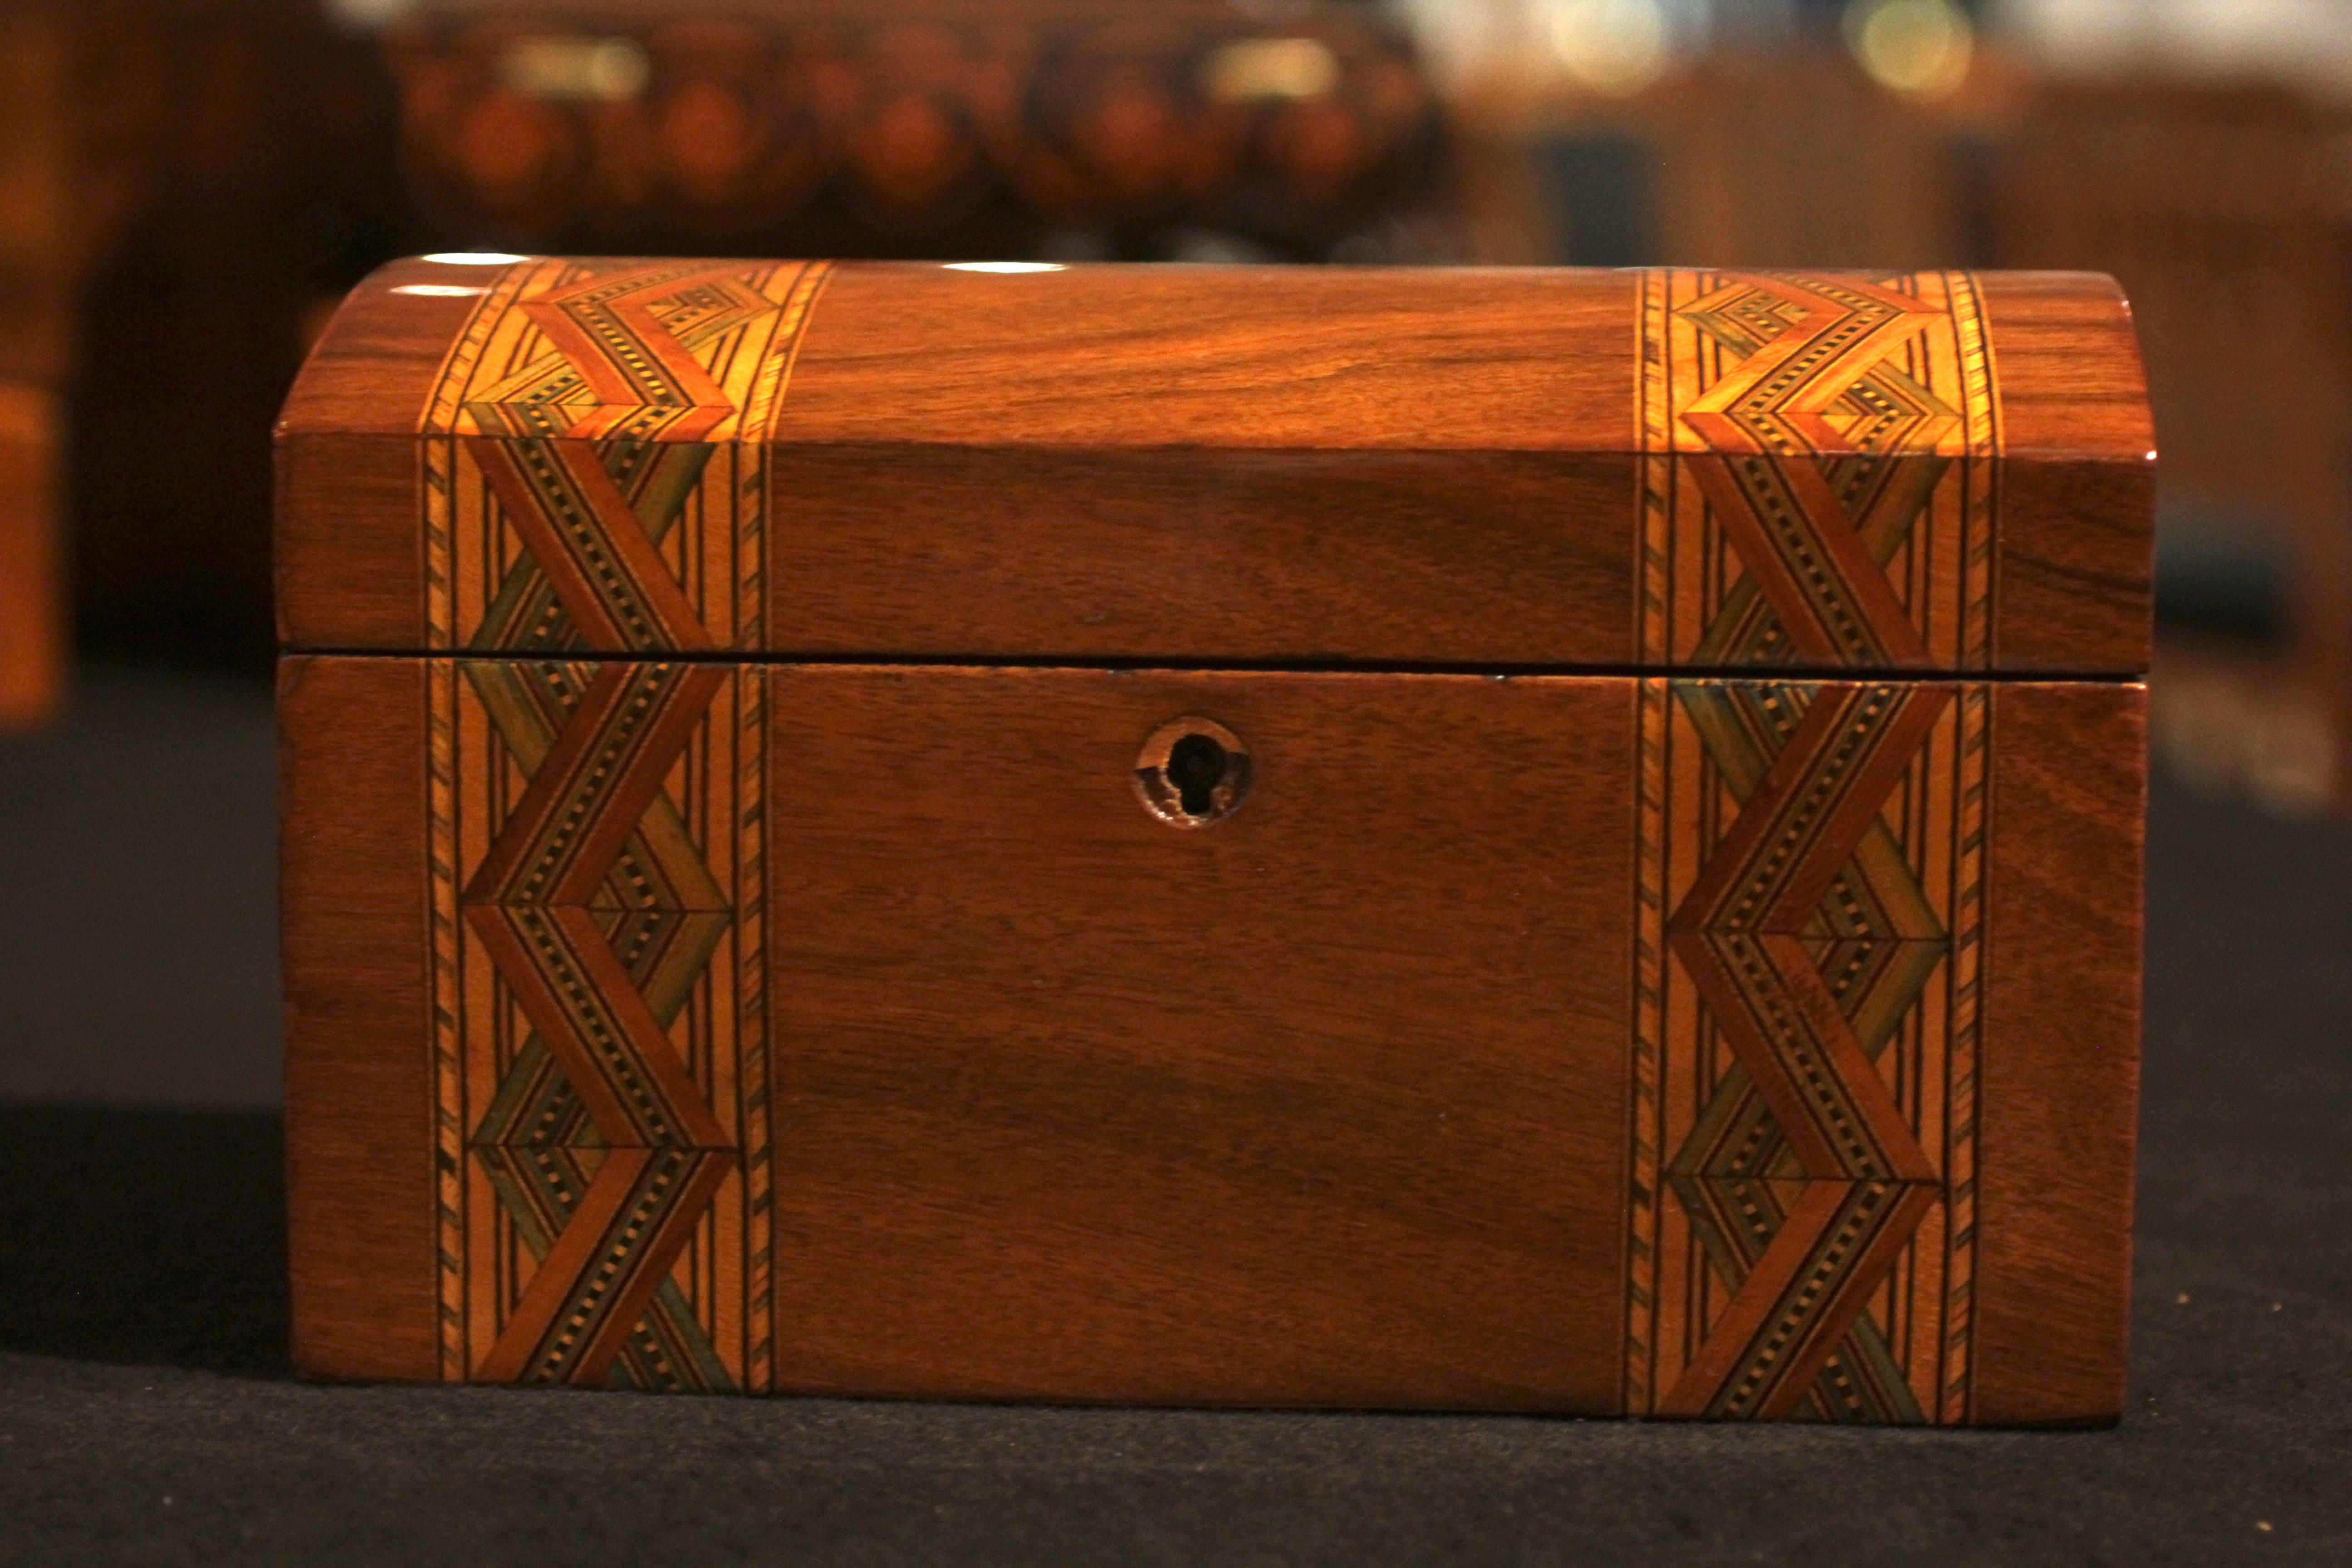 Beautiful Hand-made Historicism decorative box, jewellery, accesories box, South Germany, circa 1880.

Walnut veneered on  curved top with inlays in Maple, Plum and green colored/stained maple wood.
Fully restored with fine shellac hand-polish